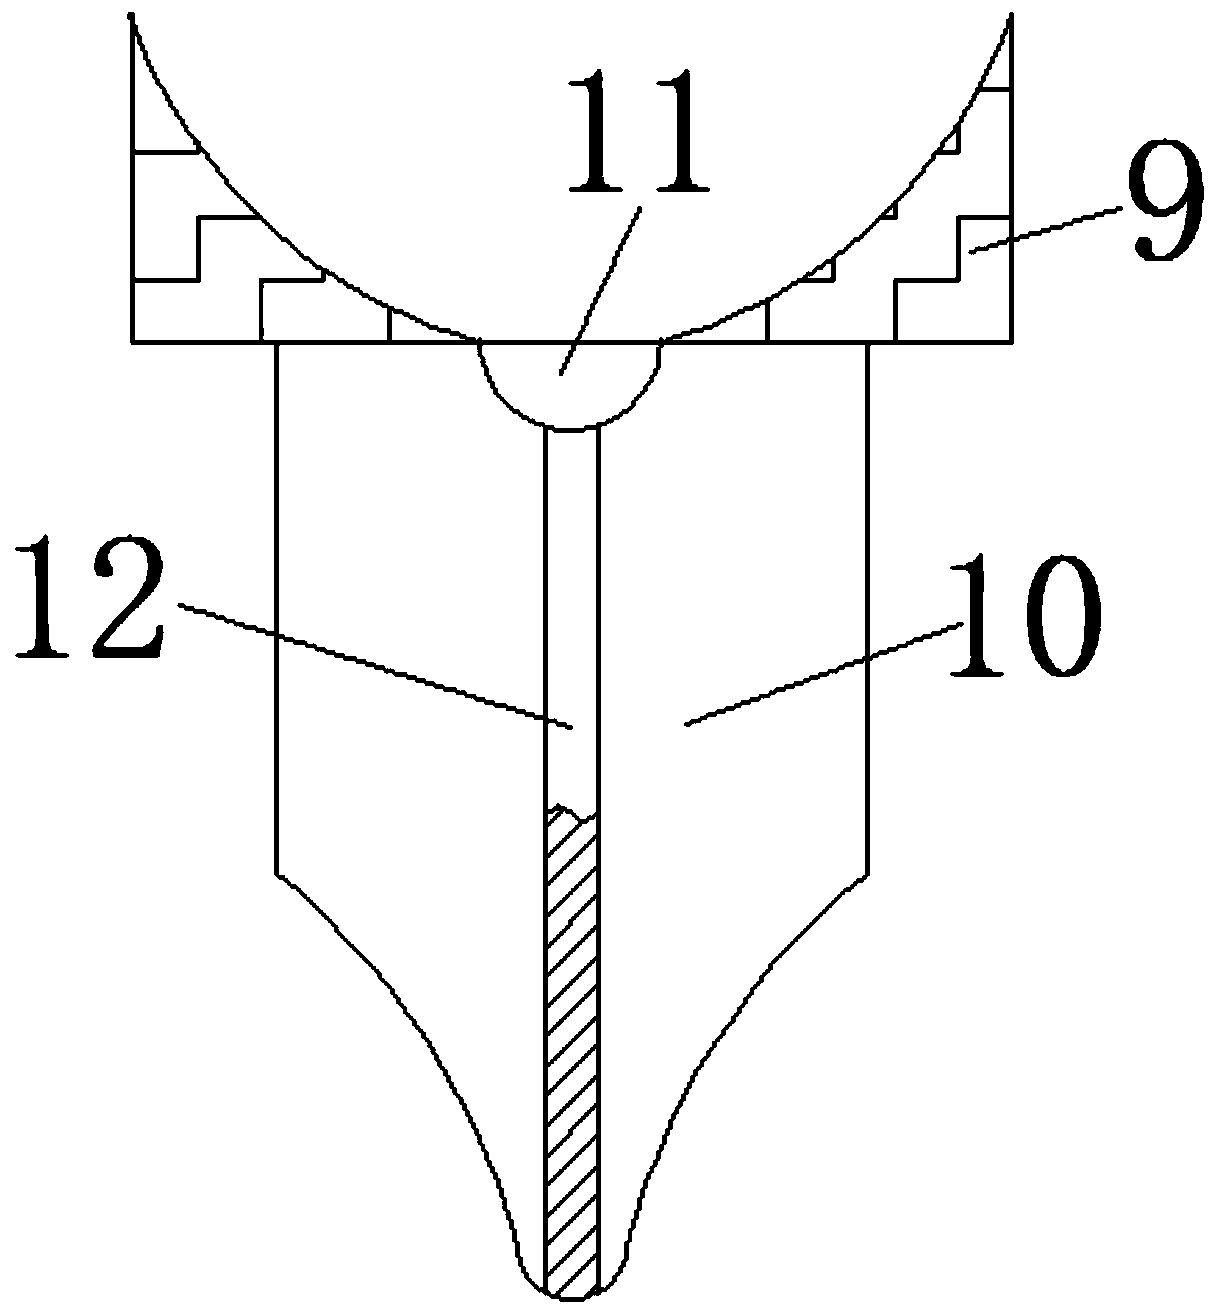 Novel engraving drill bit utilizing wall attaching function of air flow